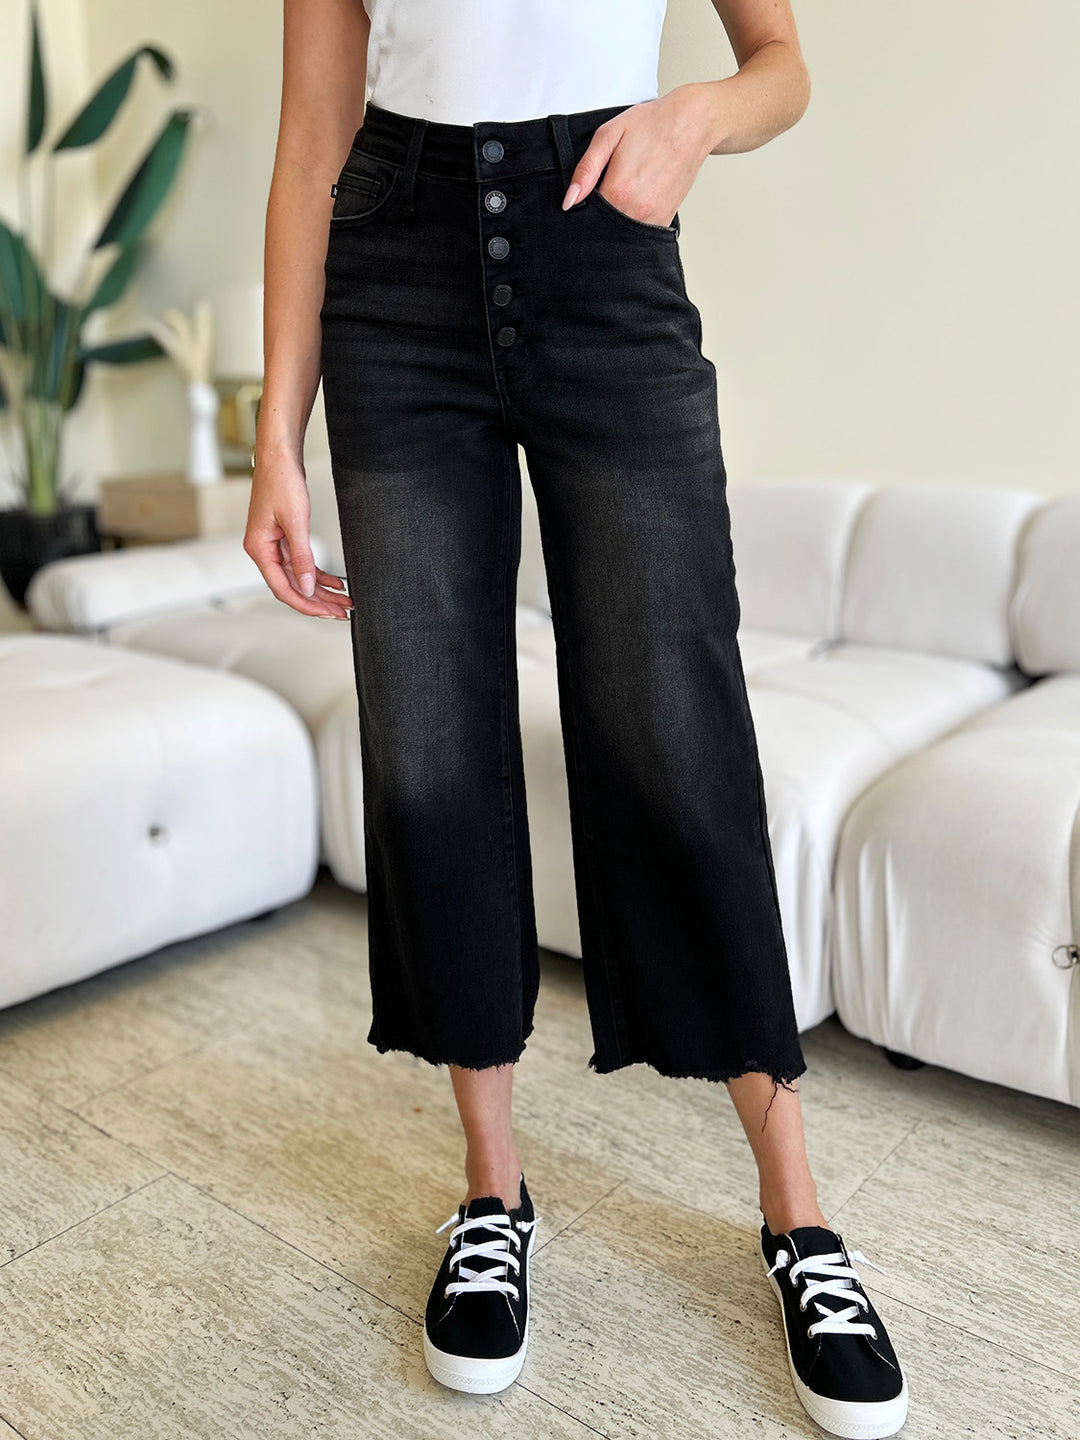 Judy Blue - High-Rise Black Button Fly Cropped Jeans - Inspired Eye Boutique